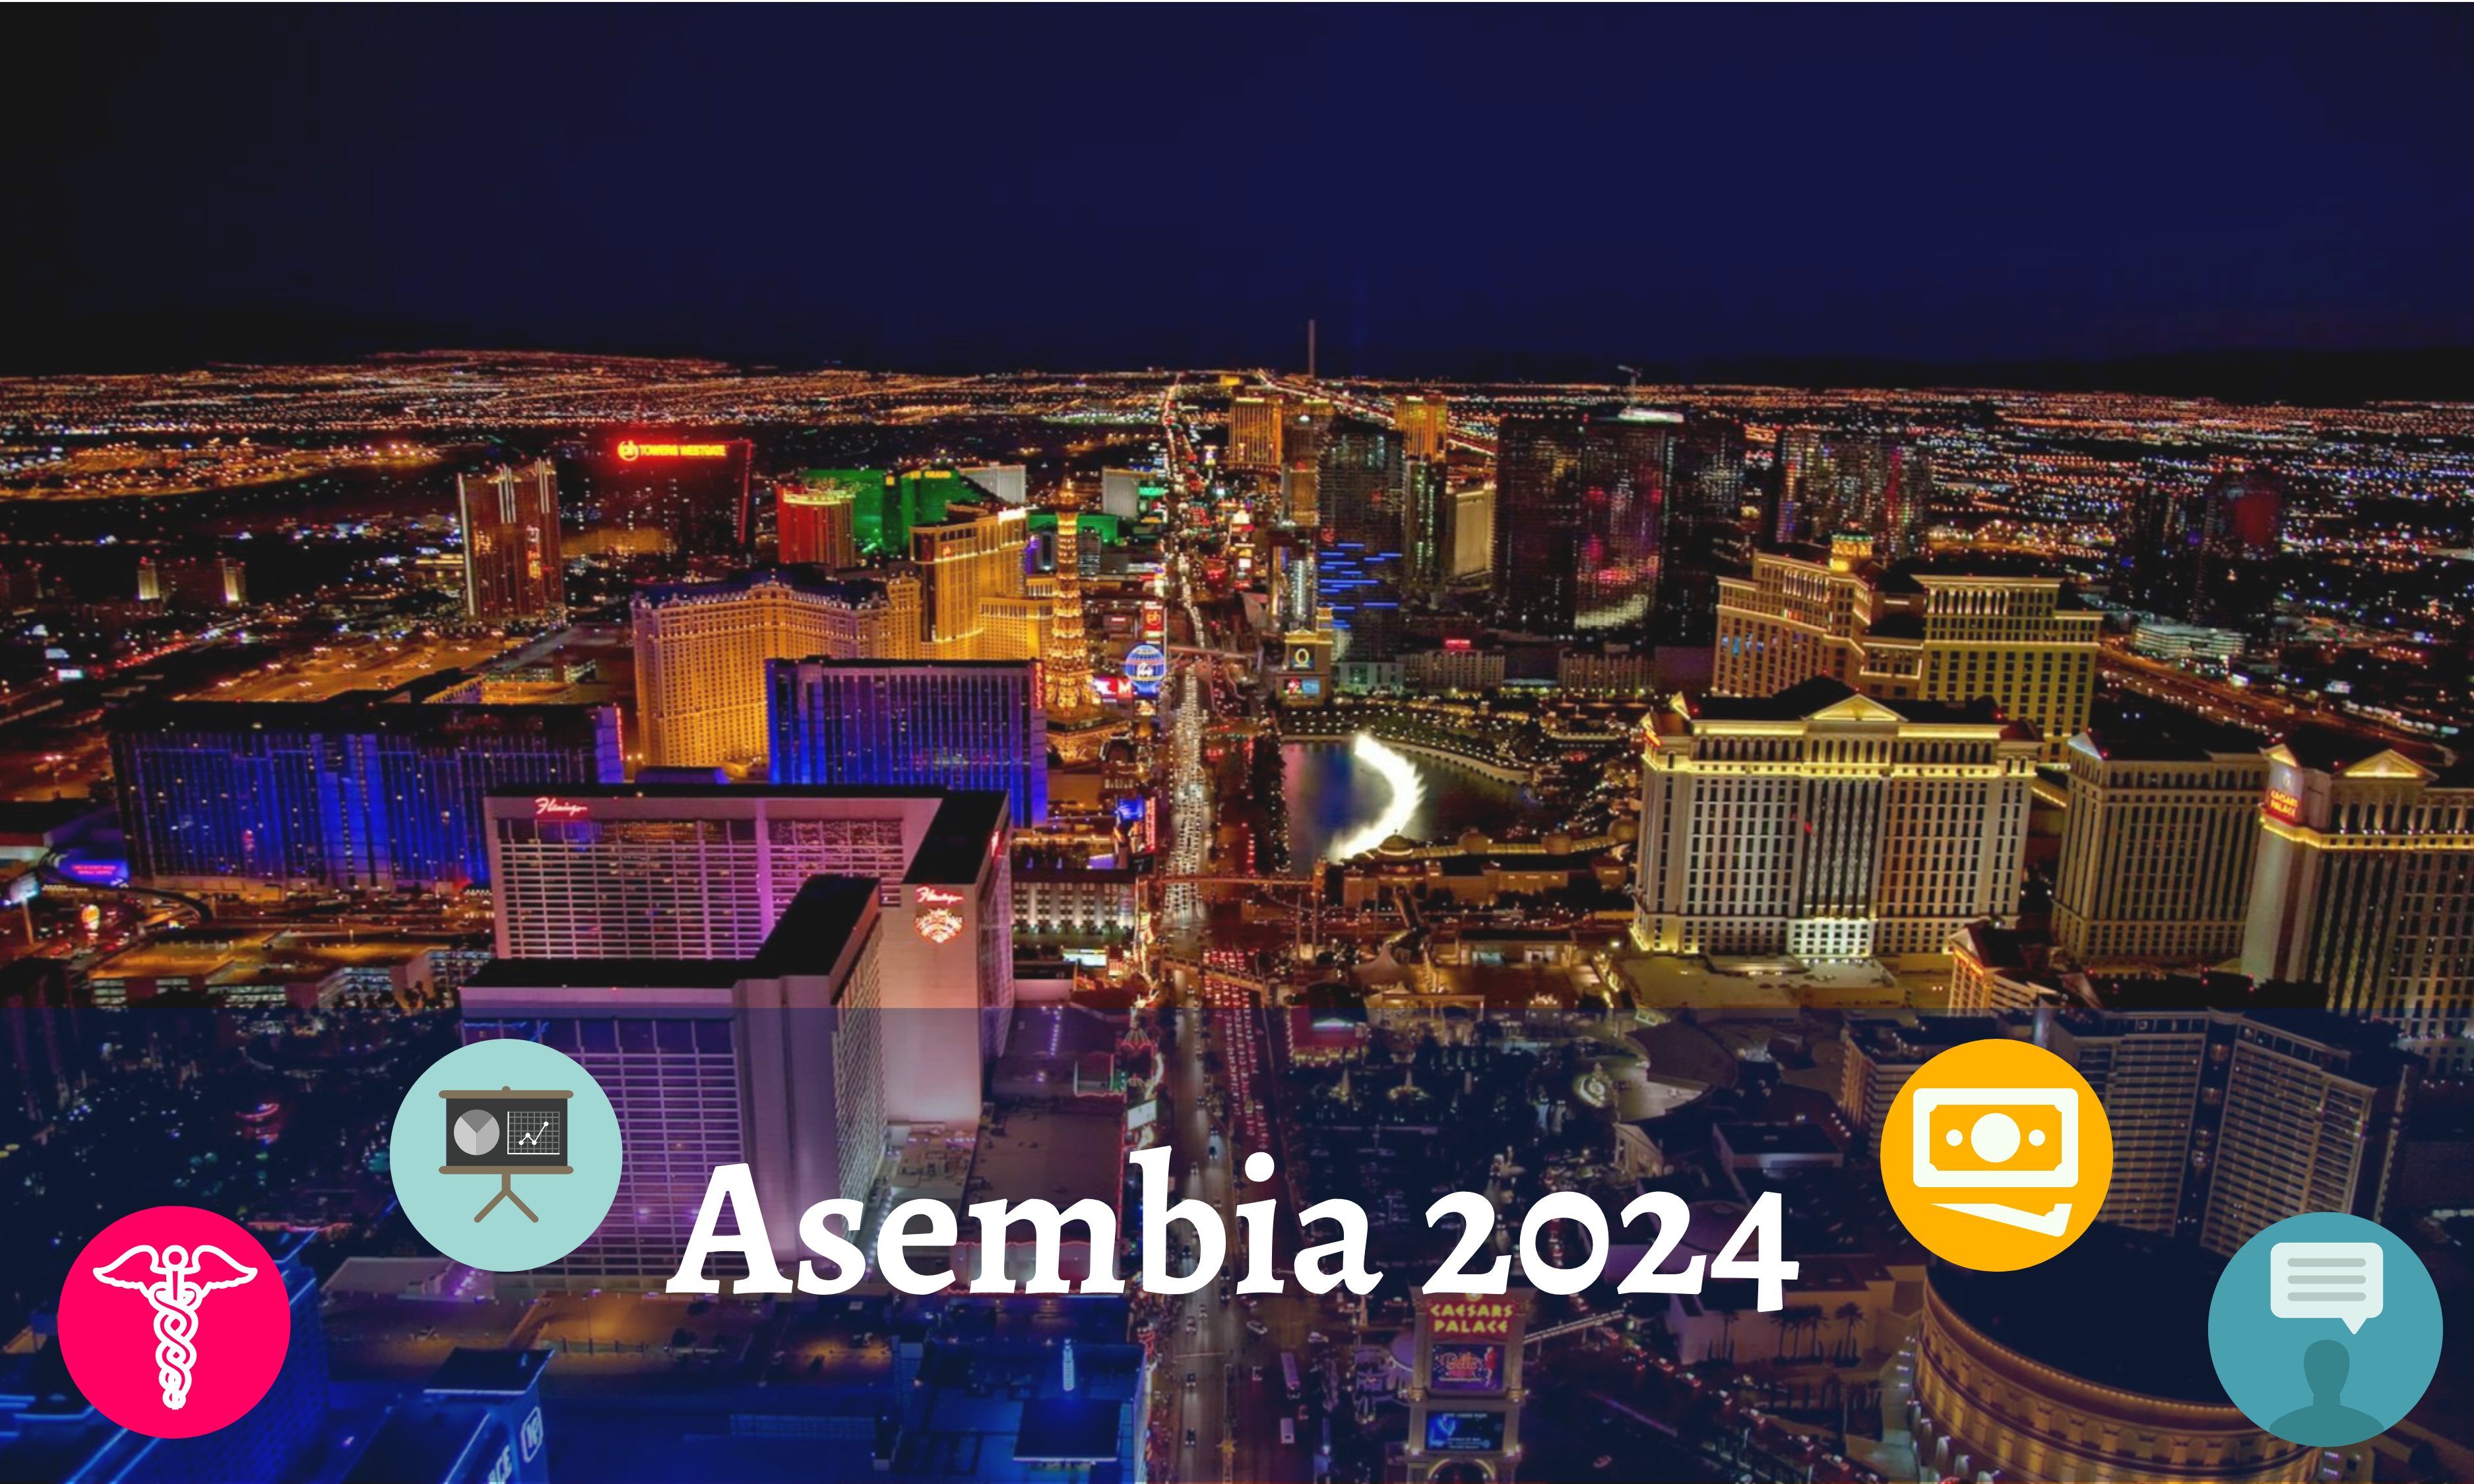 Image of Las Vegas skyline with Asembia 2024 and health icons overlaid